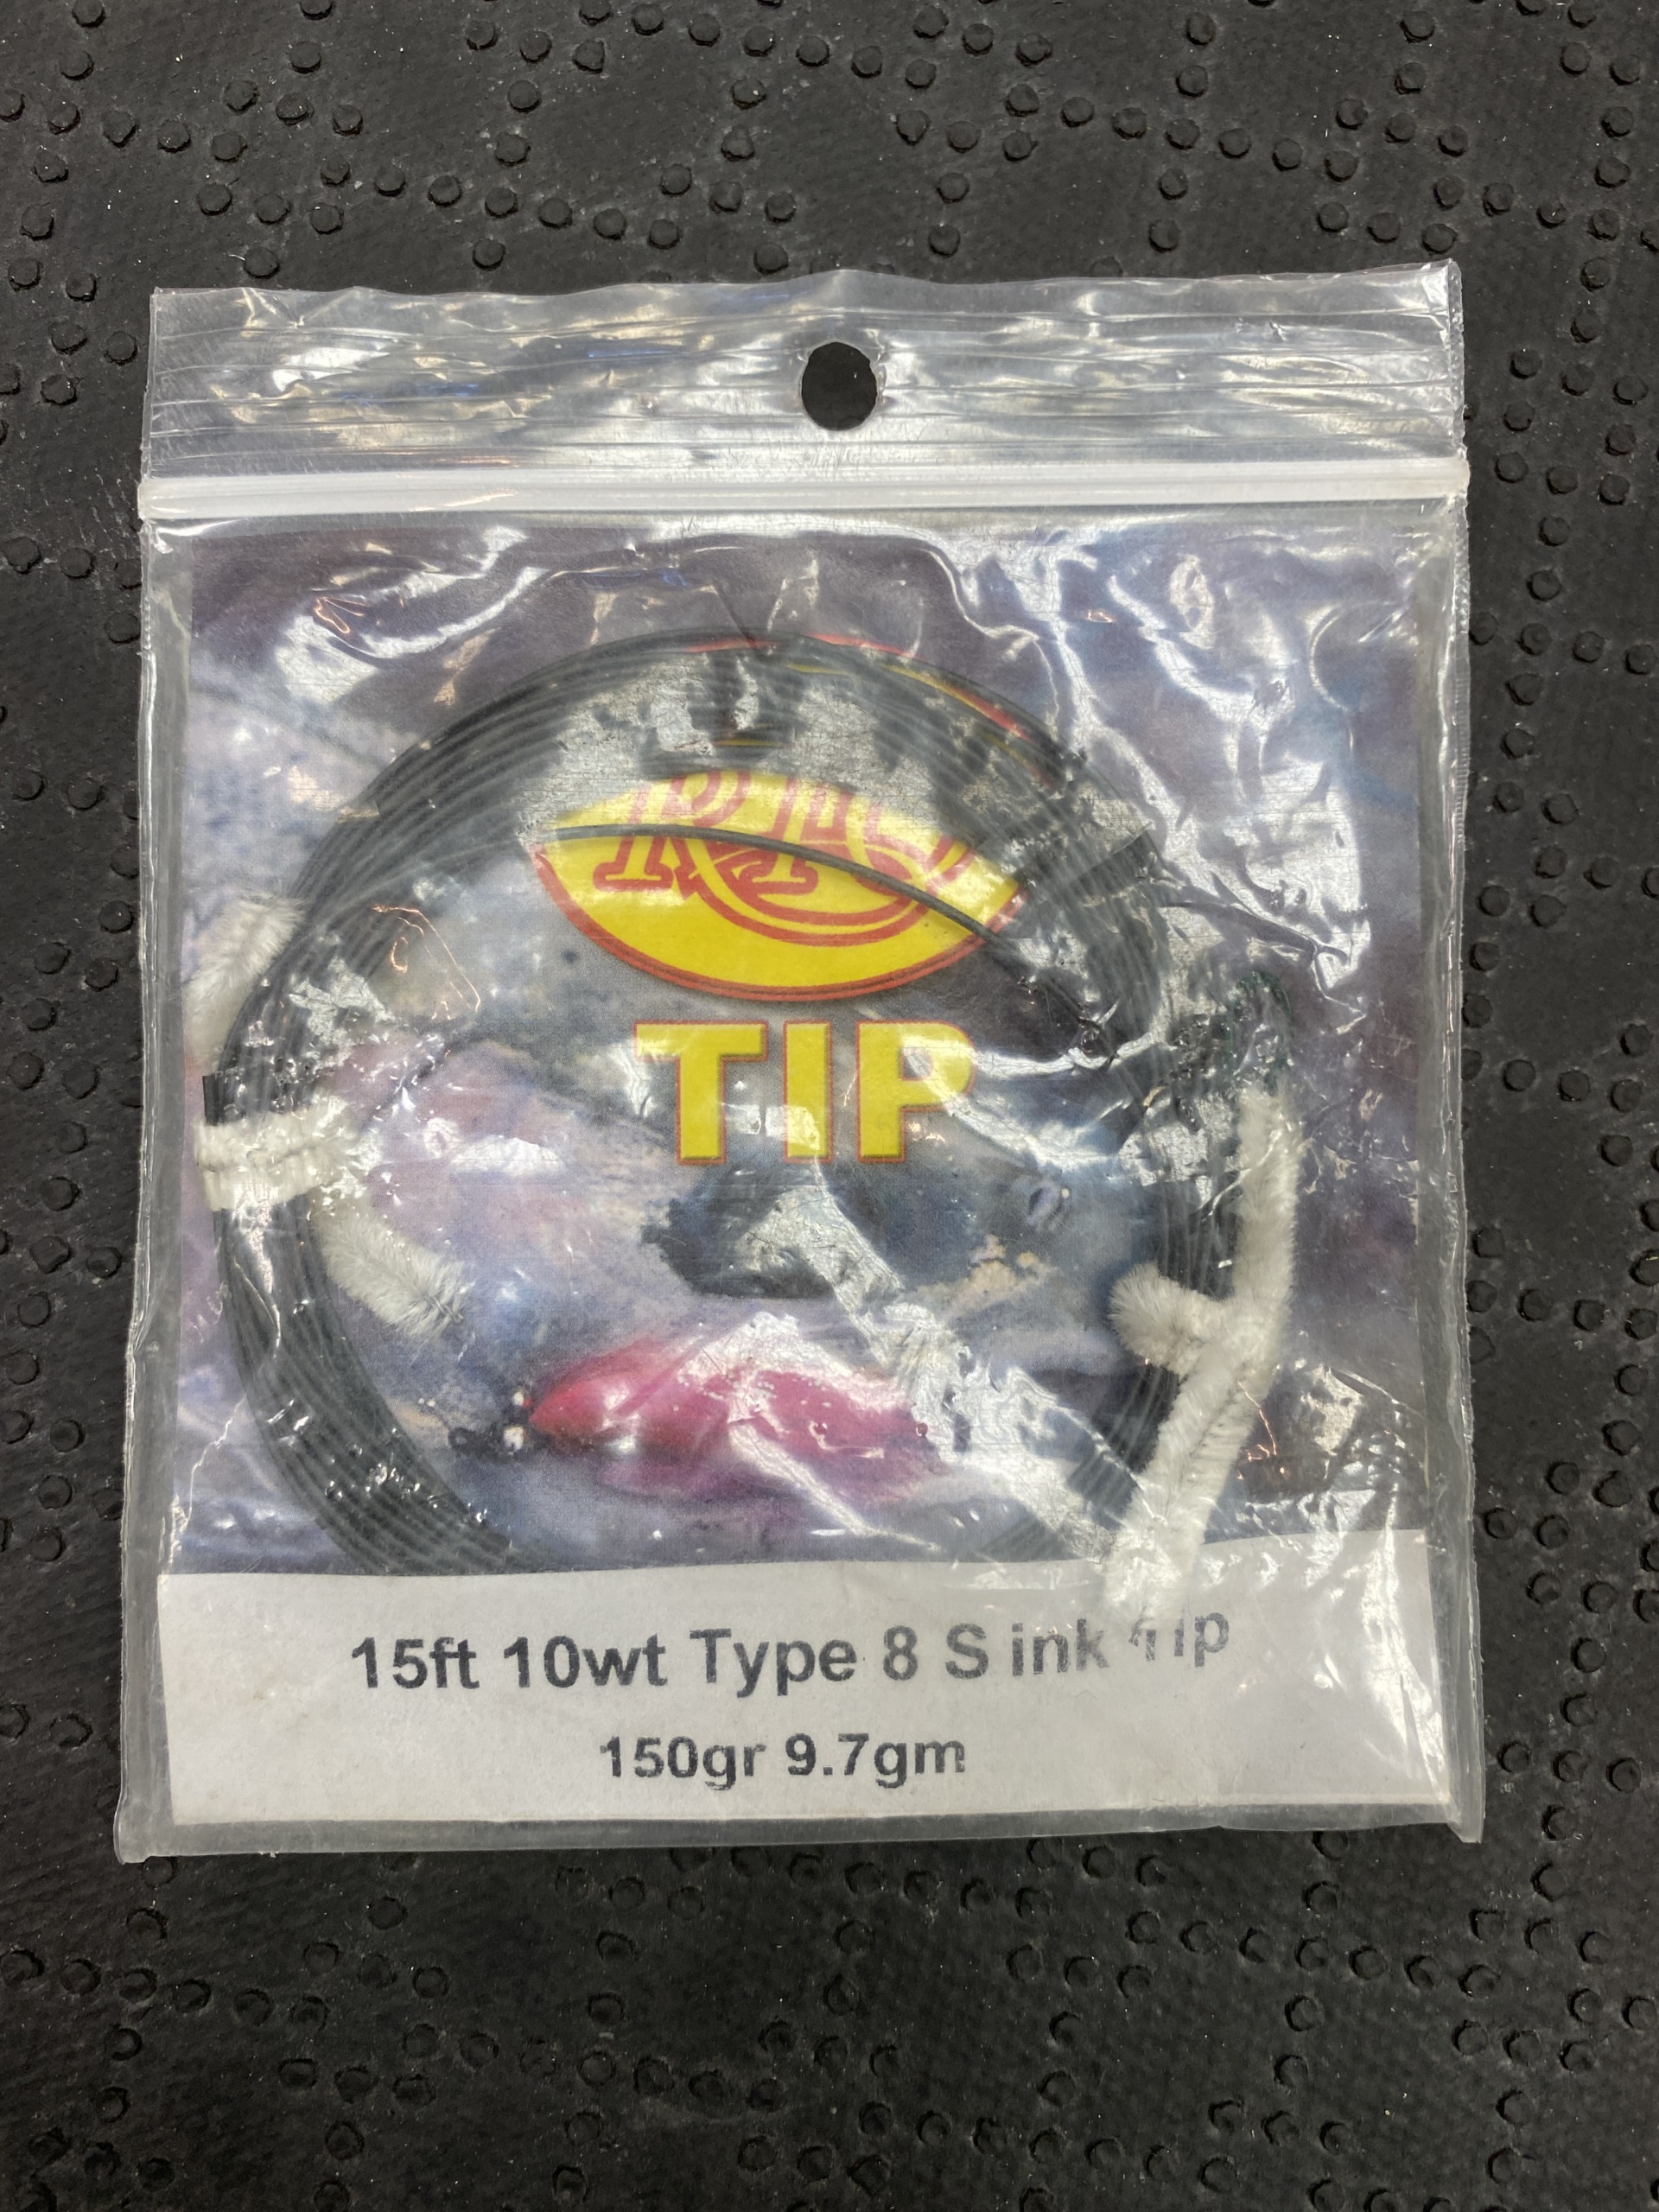 RIO – 15′ – 10Wt – Type 8 – Sink Tip – 150Grain – NEW! – $15 – The